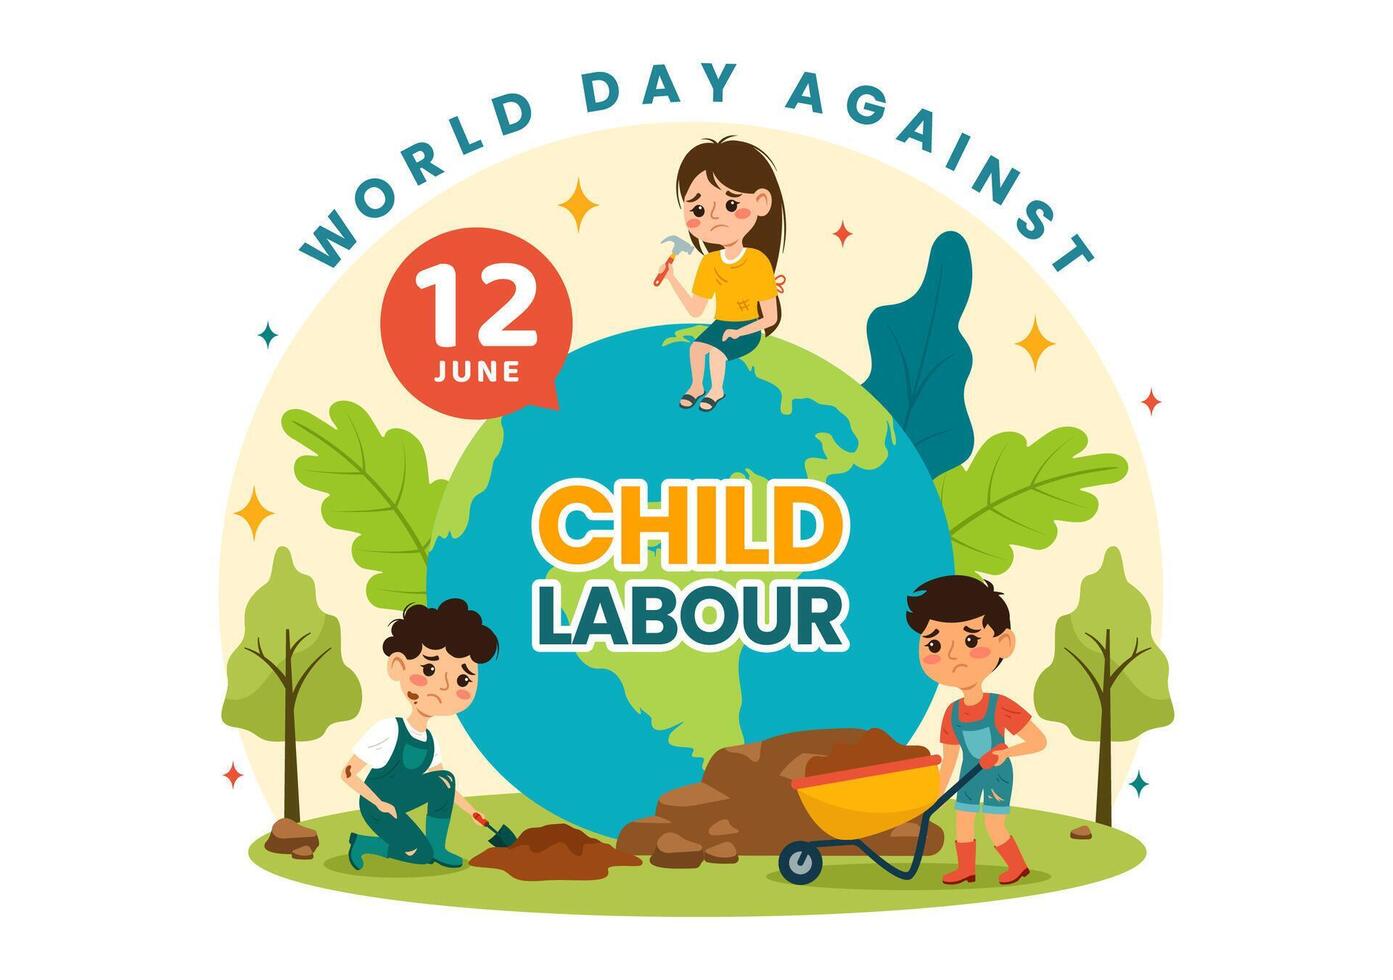 World Day Against Child Labour Vector Illustration on 12 June with Children Working for the Necessities of Life in Flat Cartoon Background